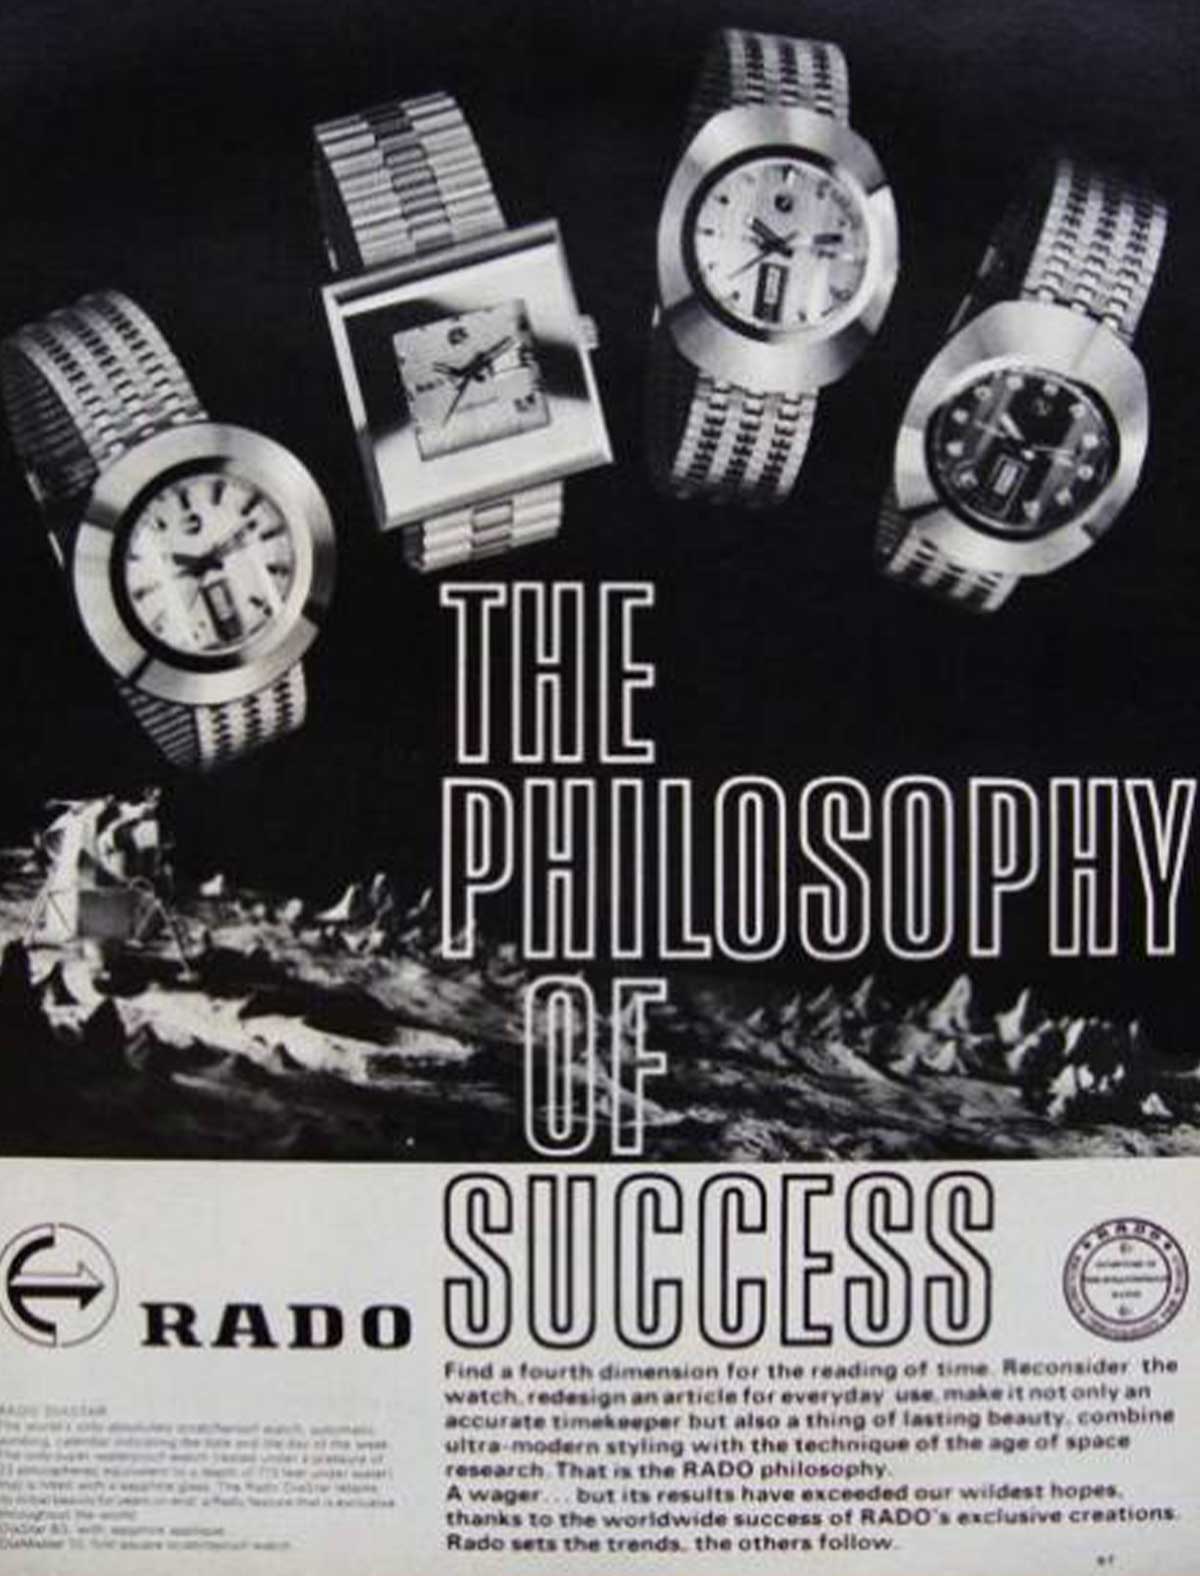 black and white space-themeed vintage Rado advertisement